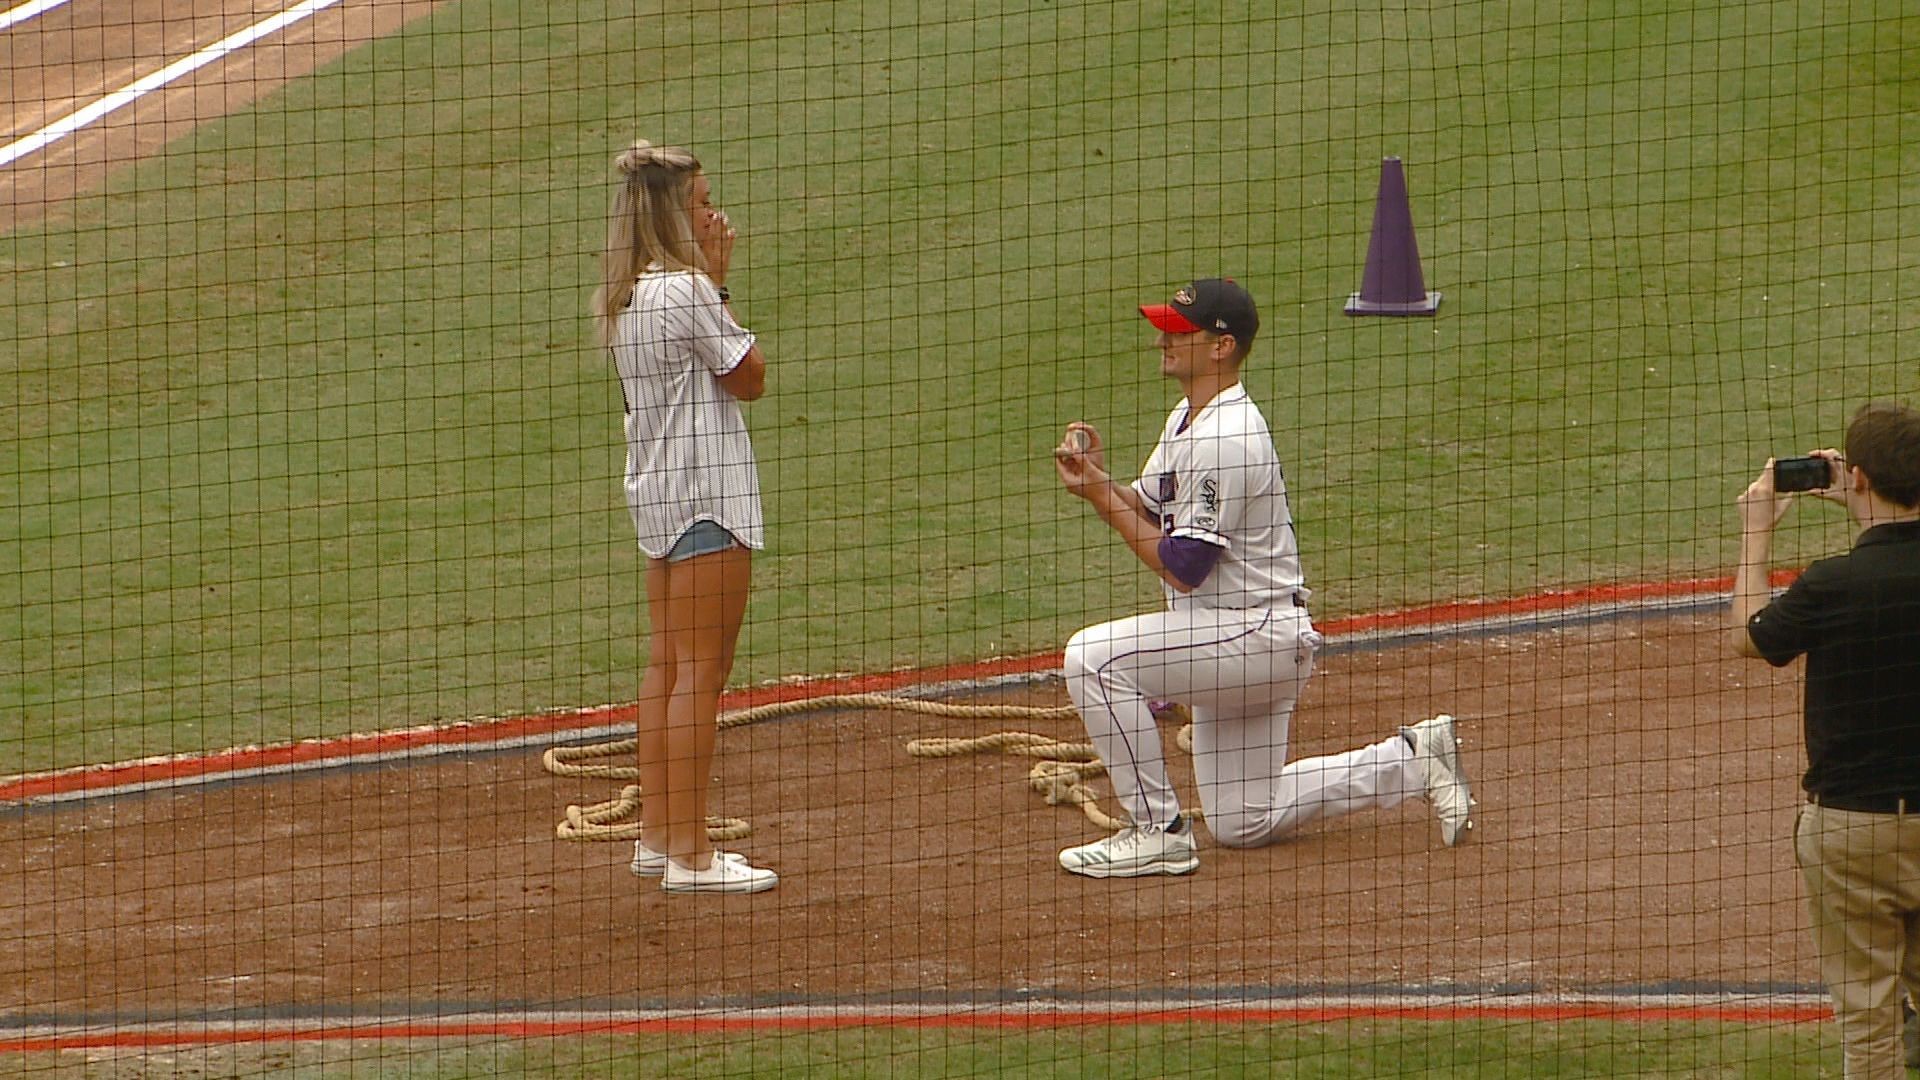 She said yes! Pitcher Zach Lewis got down on one knee between the 1st and 2nd innings and proposed to his girlfriend and now fiancé Bobbi.